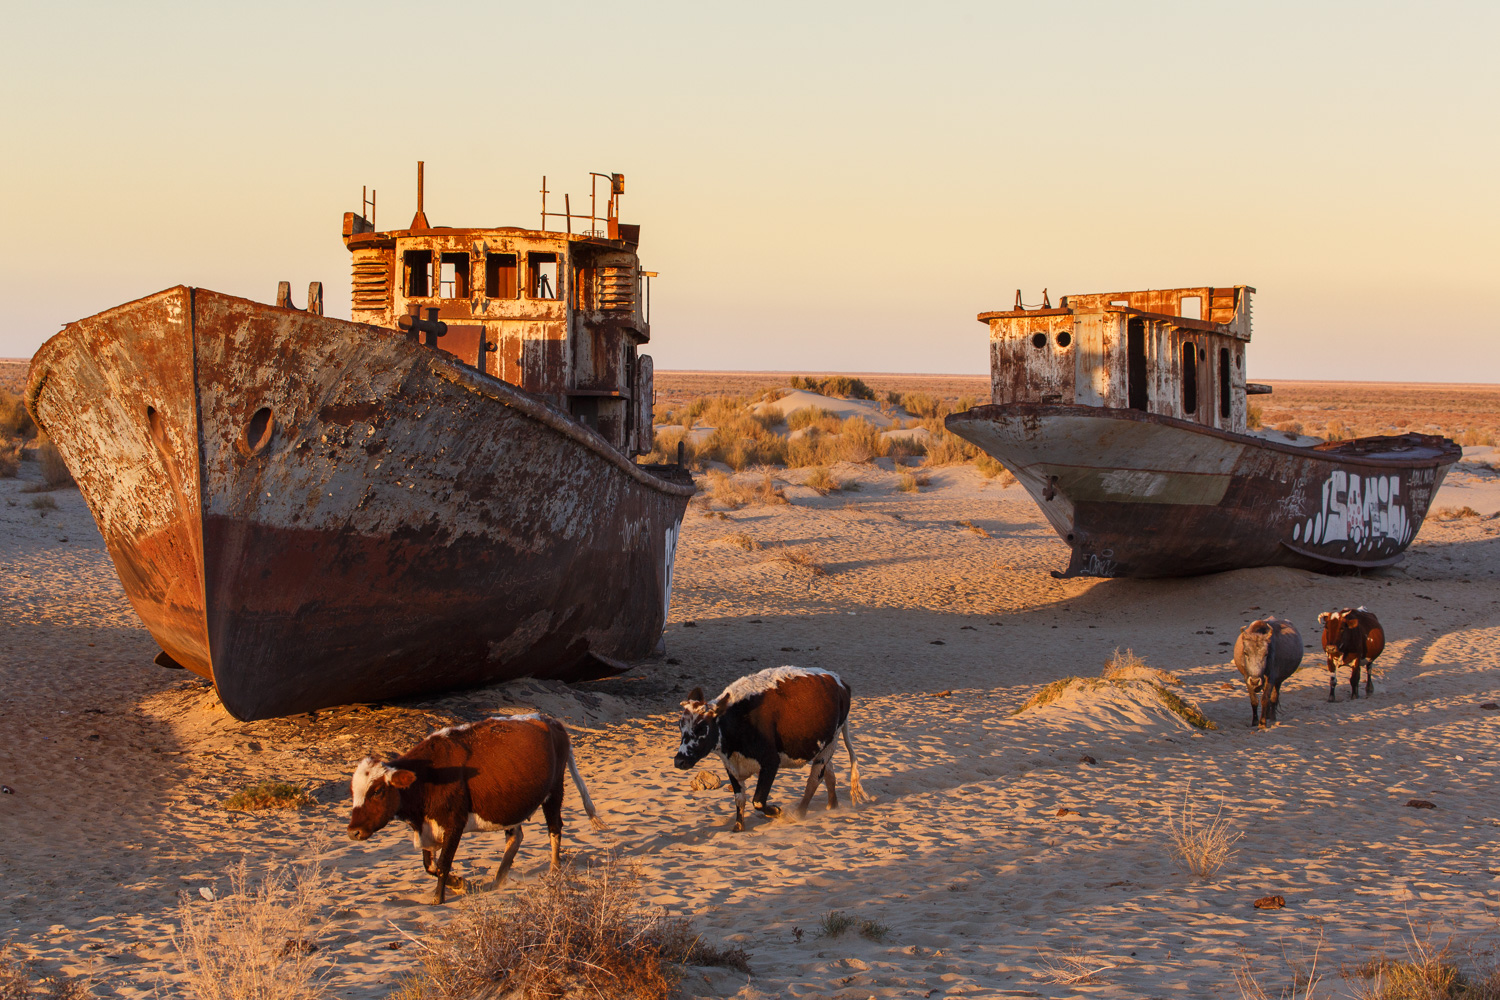  Cattle wander by the abandoned hulls of fishing boats on the dried bed of the Aral sea in Moynaq, Uzbekistan - formerly one of the four largest lakes in the world. 